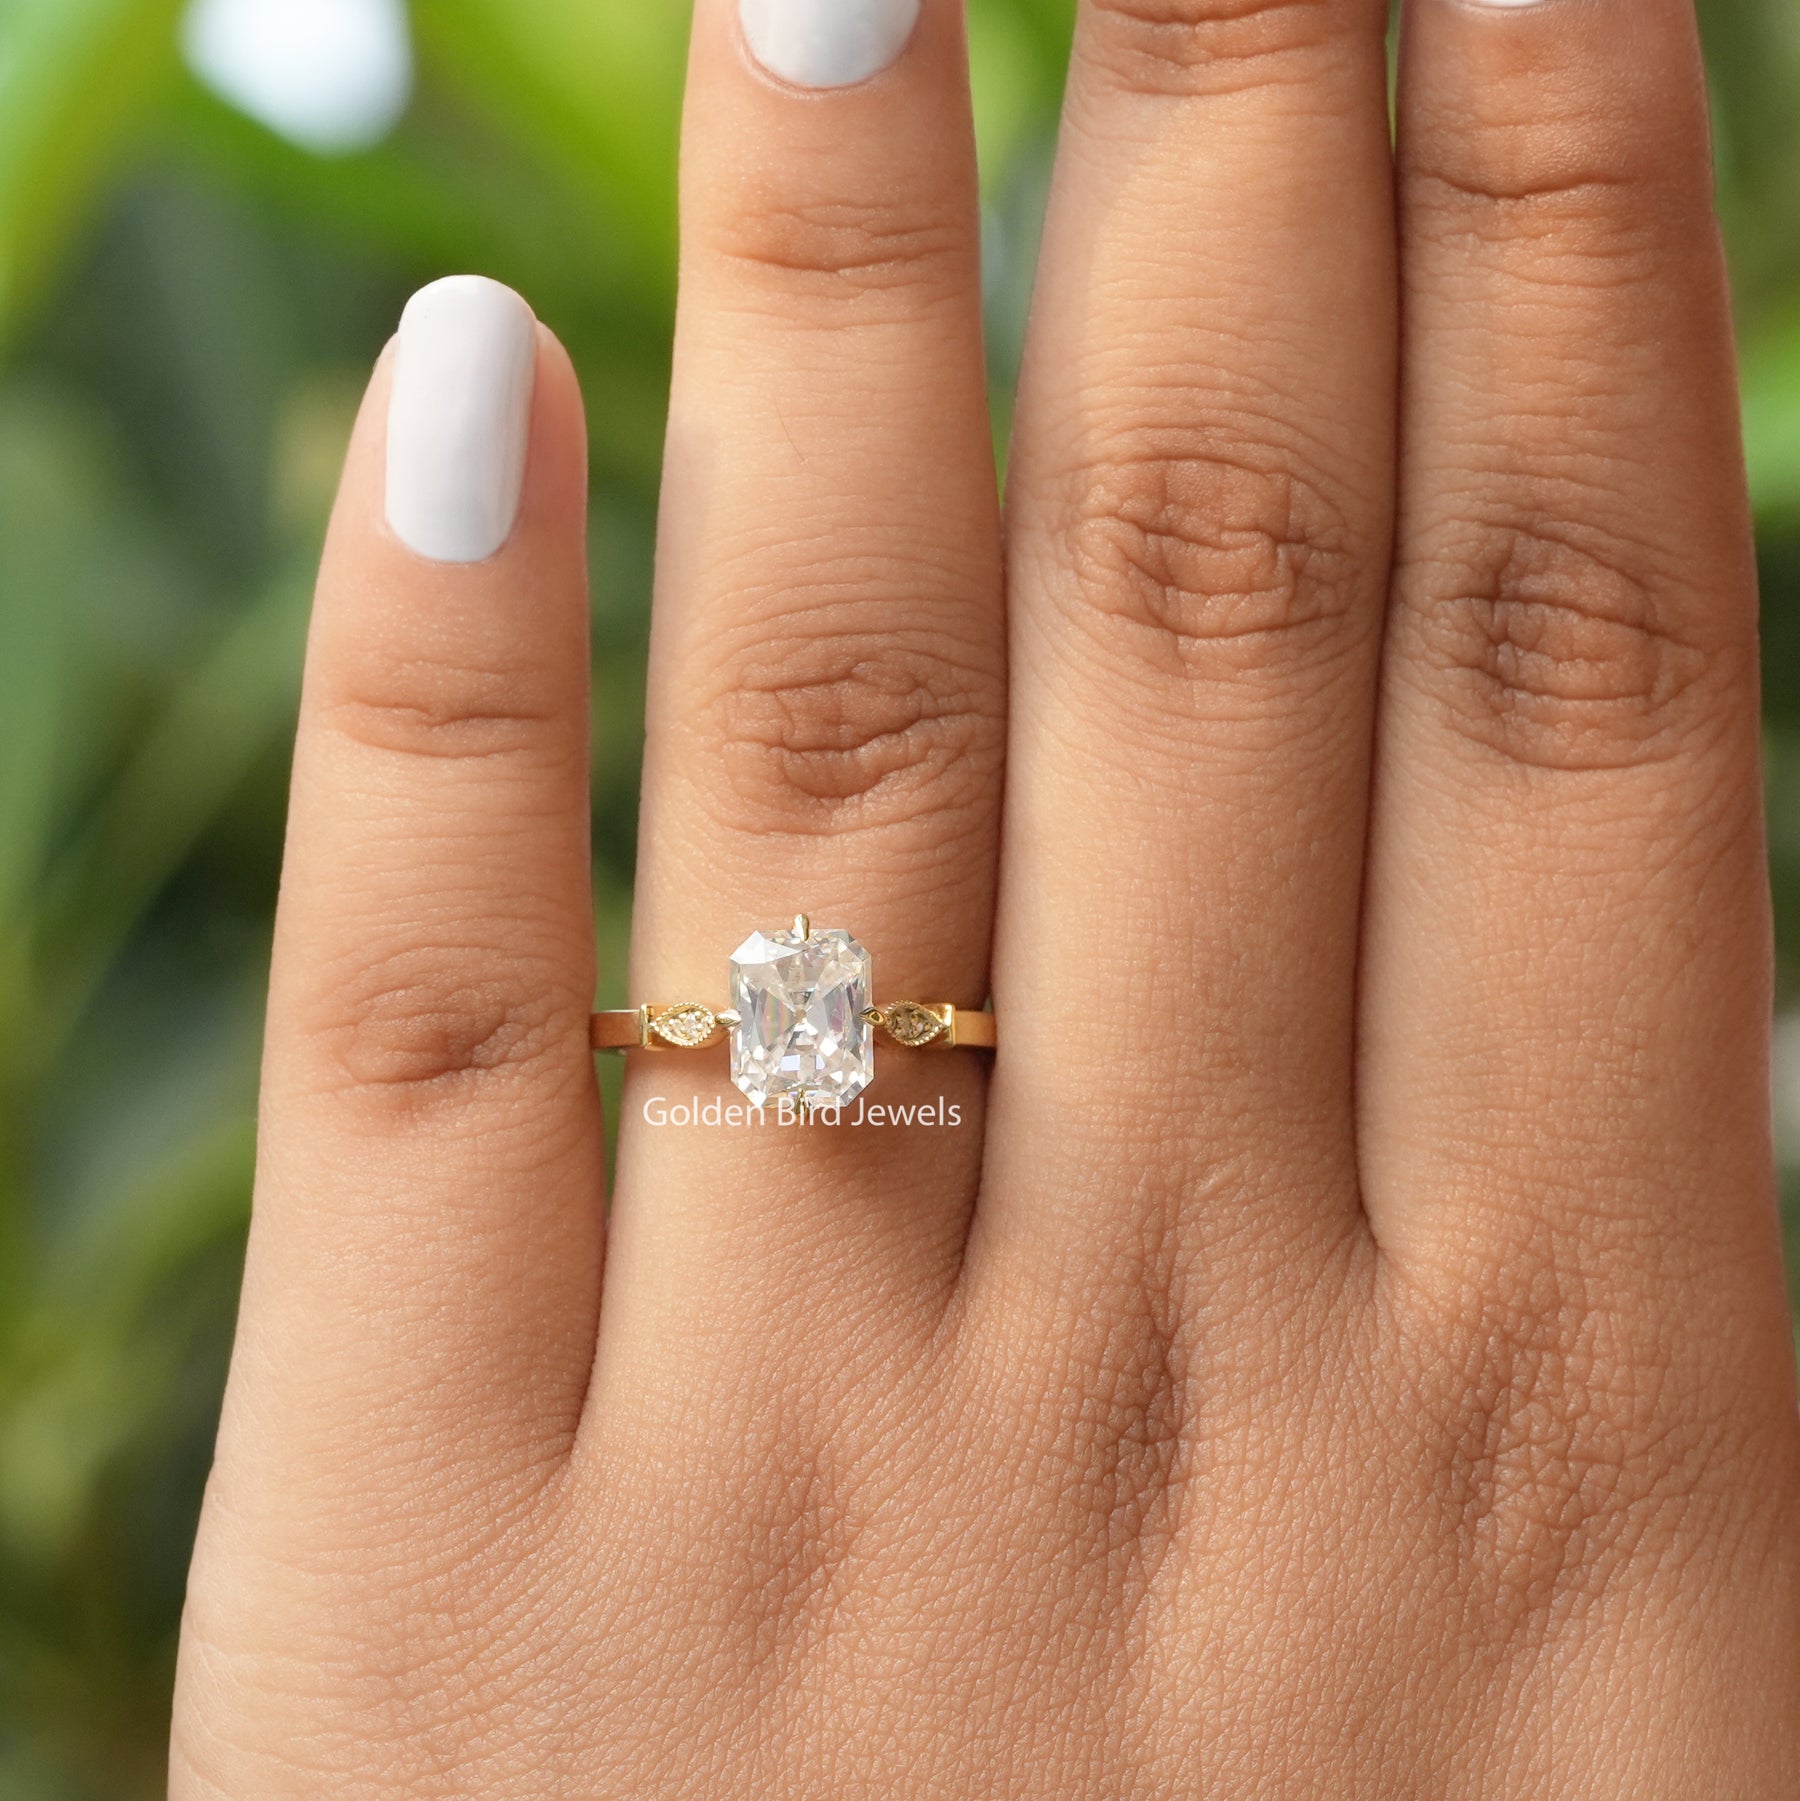 [This radiant cut moissanite ring made of round cut stones]-[Golden Bird Jewels]